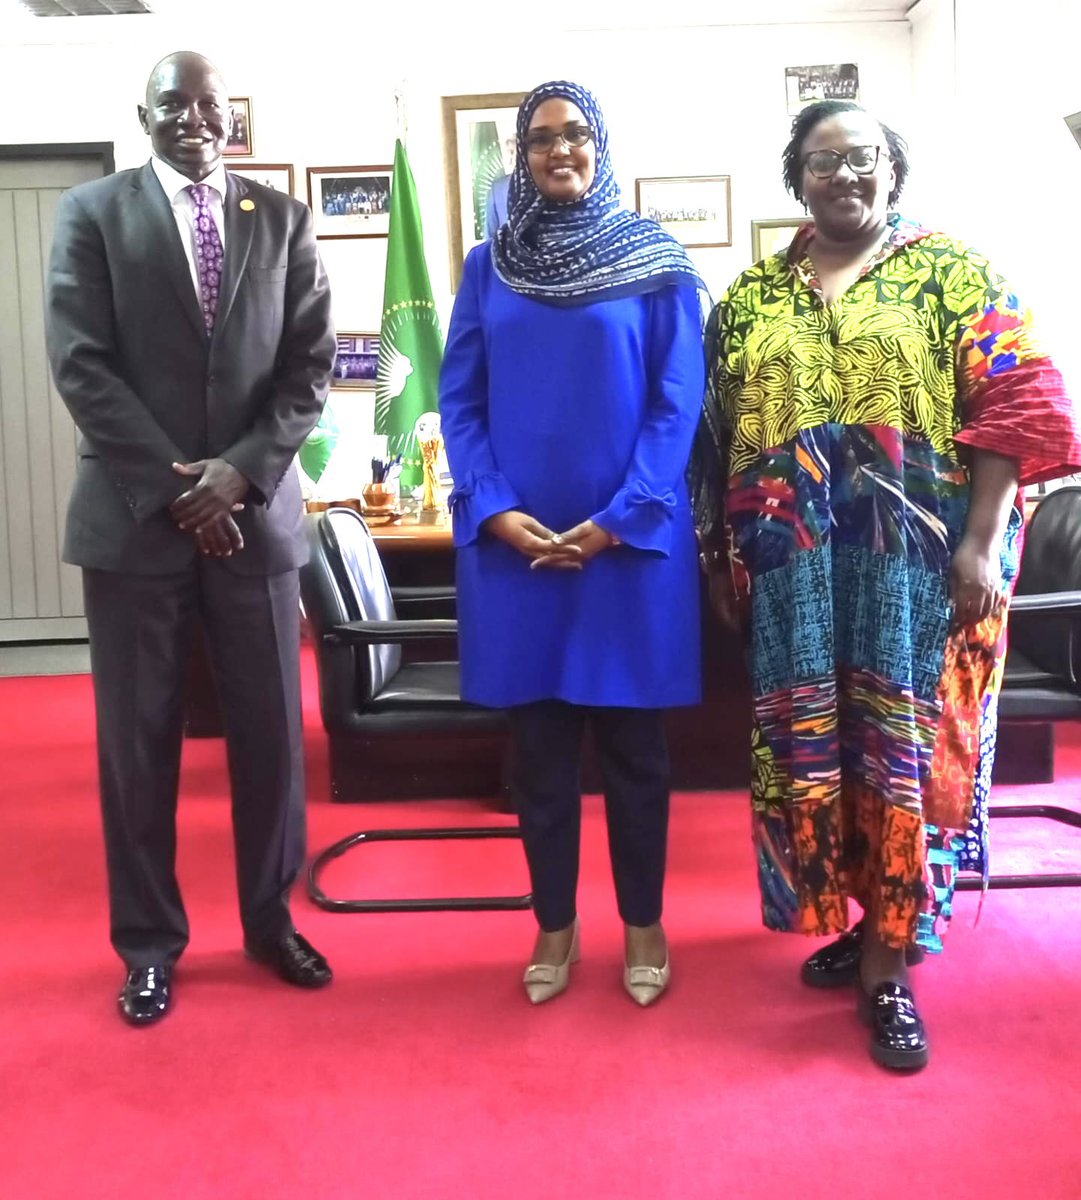 Great meeting with Dr. Huyam Director of @au_ibar. Her leadership and collaborative approach are driving meaningful change through #OneHealth initiatives. Together, we're shaping a healthier future for Africa in line with @AfricaCDC strategy aspiration and @JeanKaseya2 vision